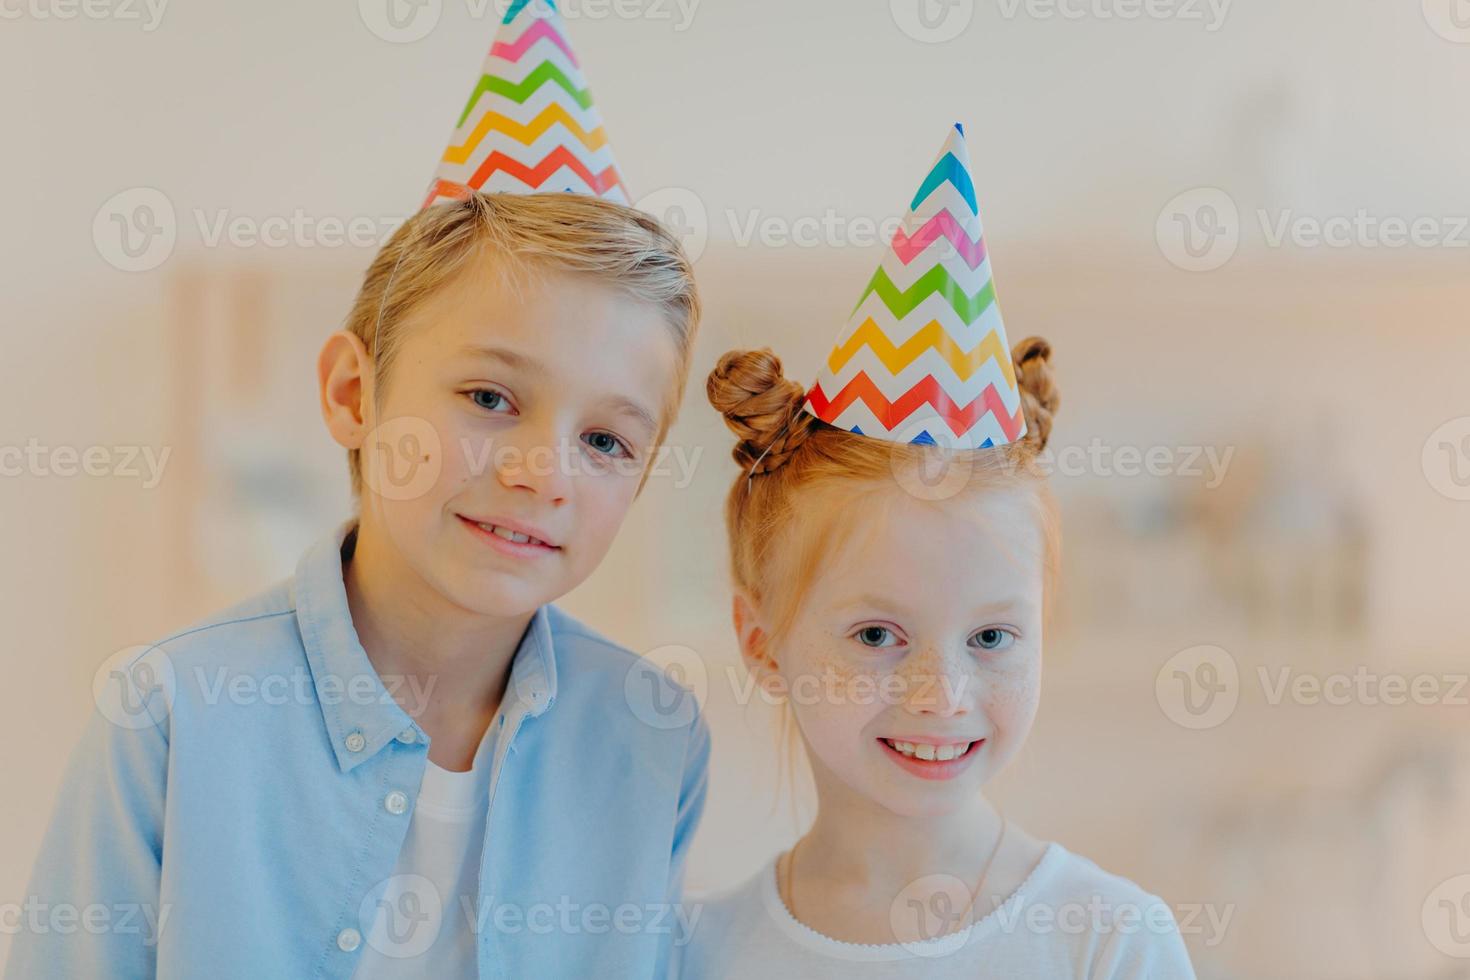 Portrait of happy ginger girl and her broghter stand closely to each other, wear party hats, come on friends birthday, look gladfully at camera, pose against blurred background. Childhood concept photo